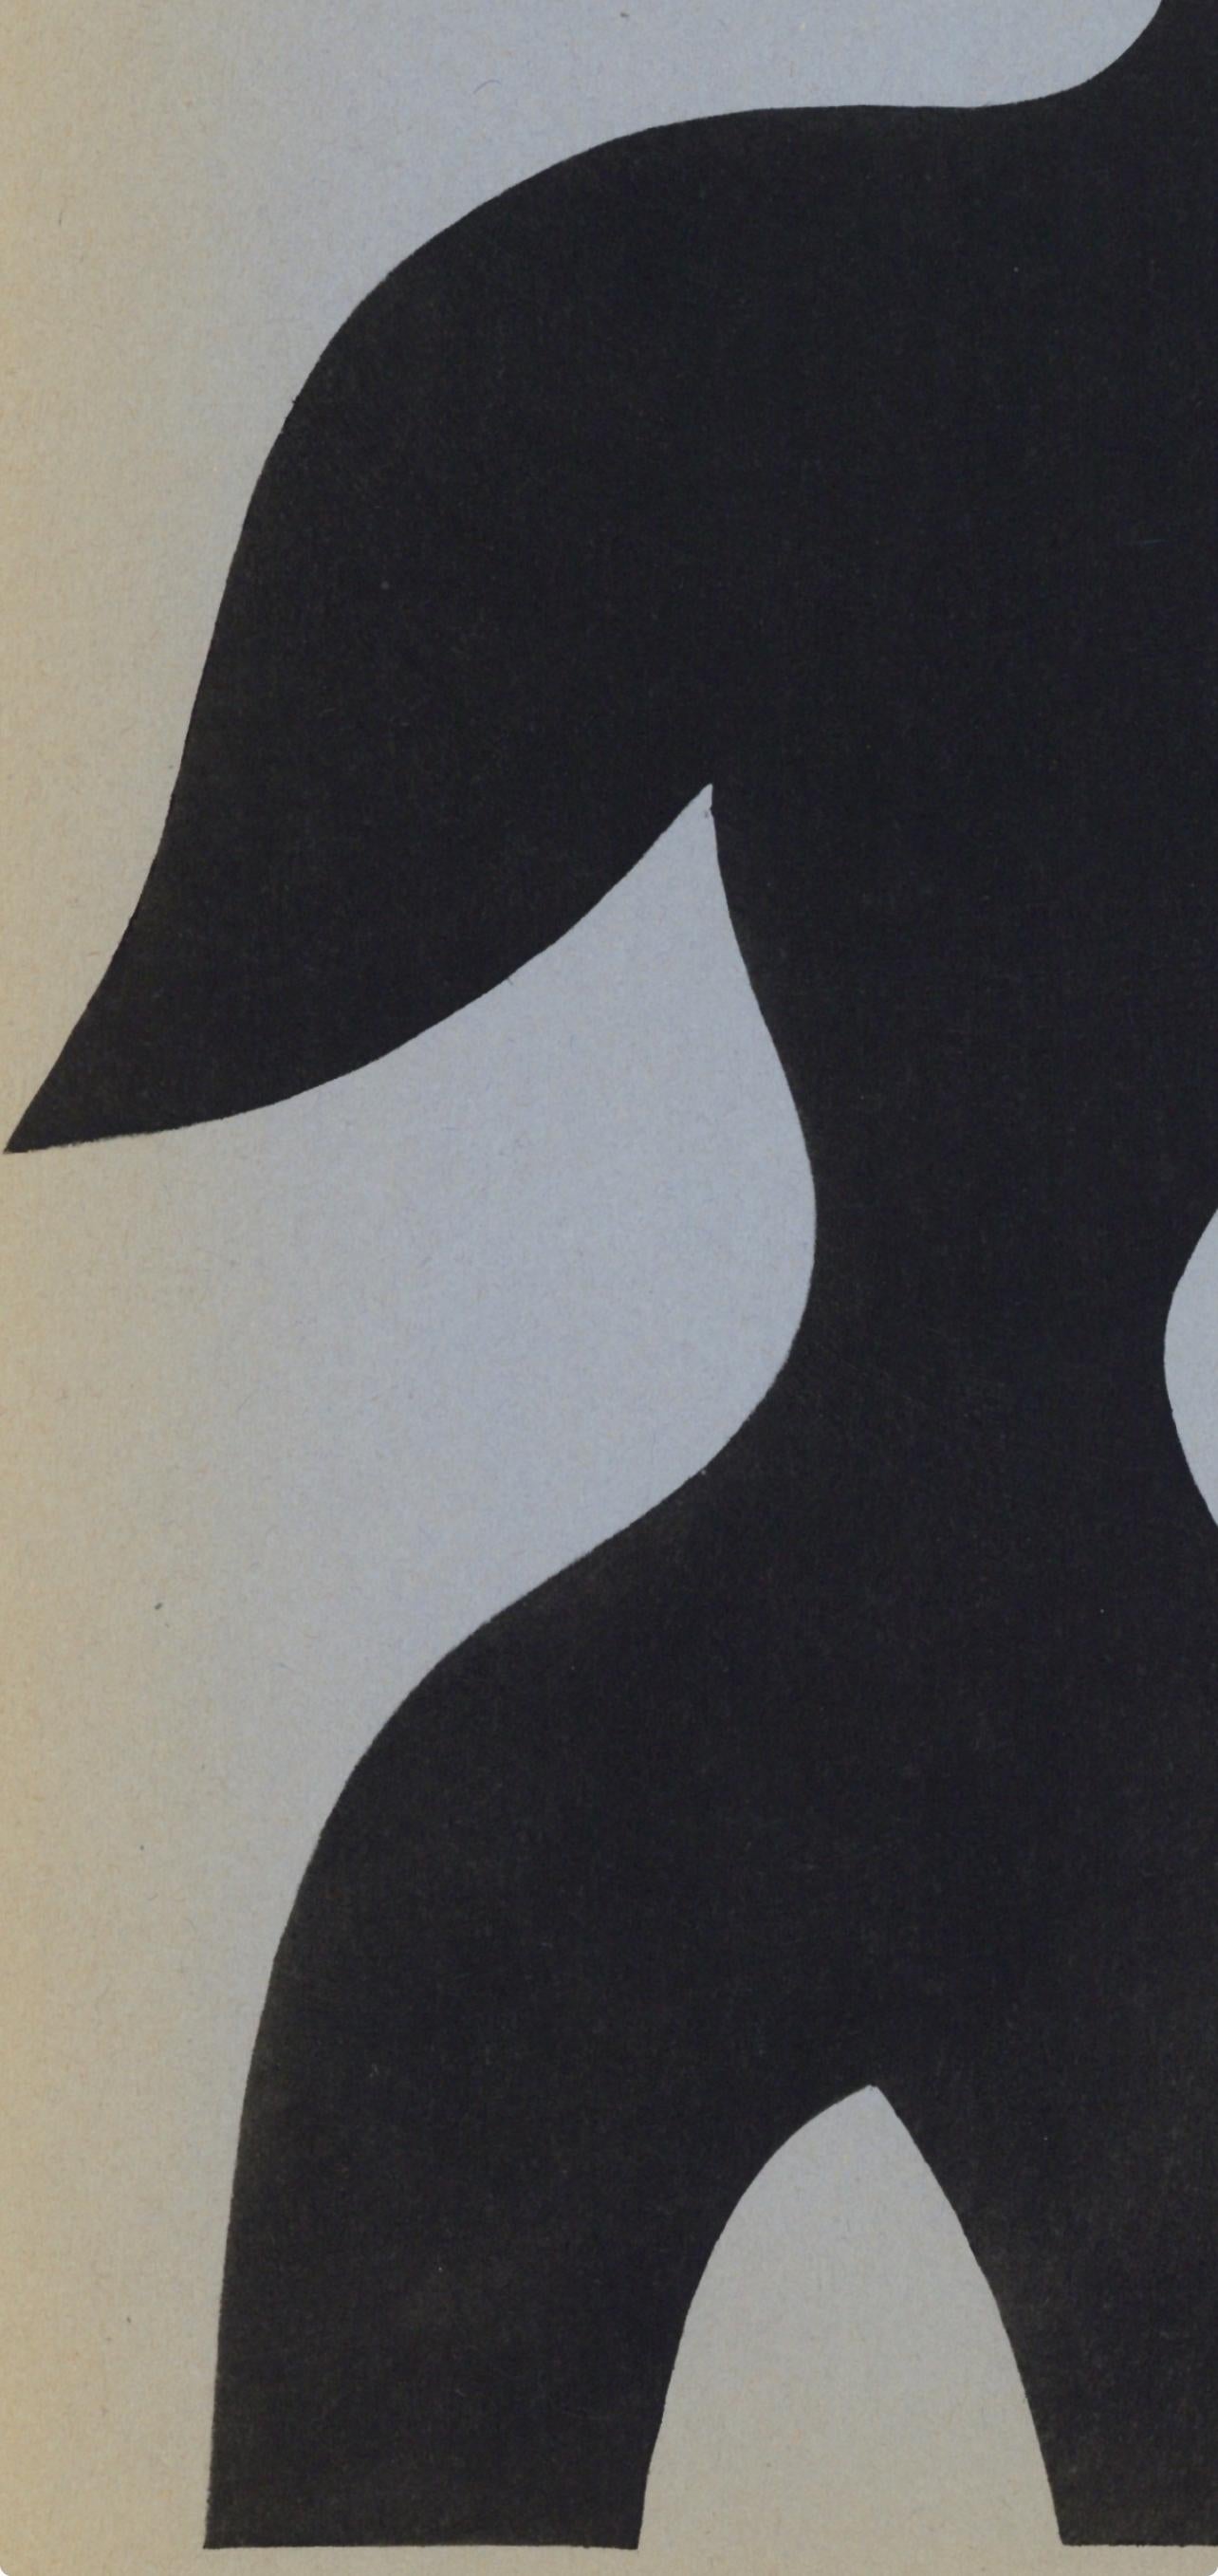 Original Edition Lithograph on wove paper. Unsigned and unnumbered, as issued. Good Condition; never framed or matted. Notes: From the volume, XXe Siècle, n°8, 1957. Published by Editions XXe Siècle, Paris; Printed by Mourlot, Paris, 1957.

JEAN ARP